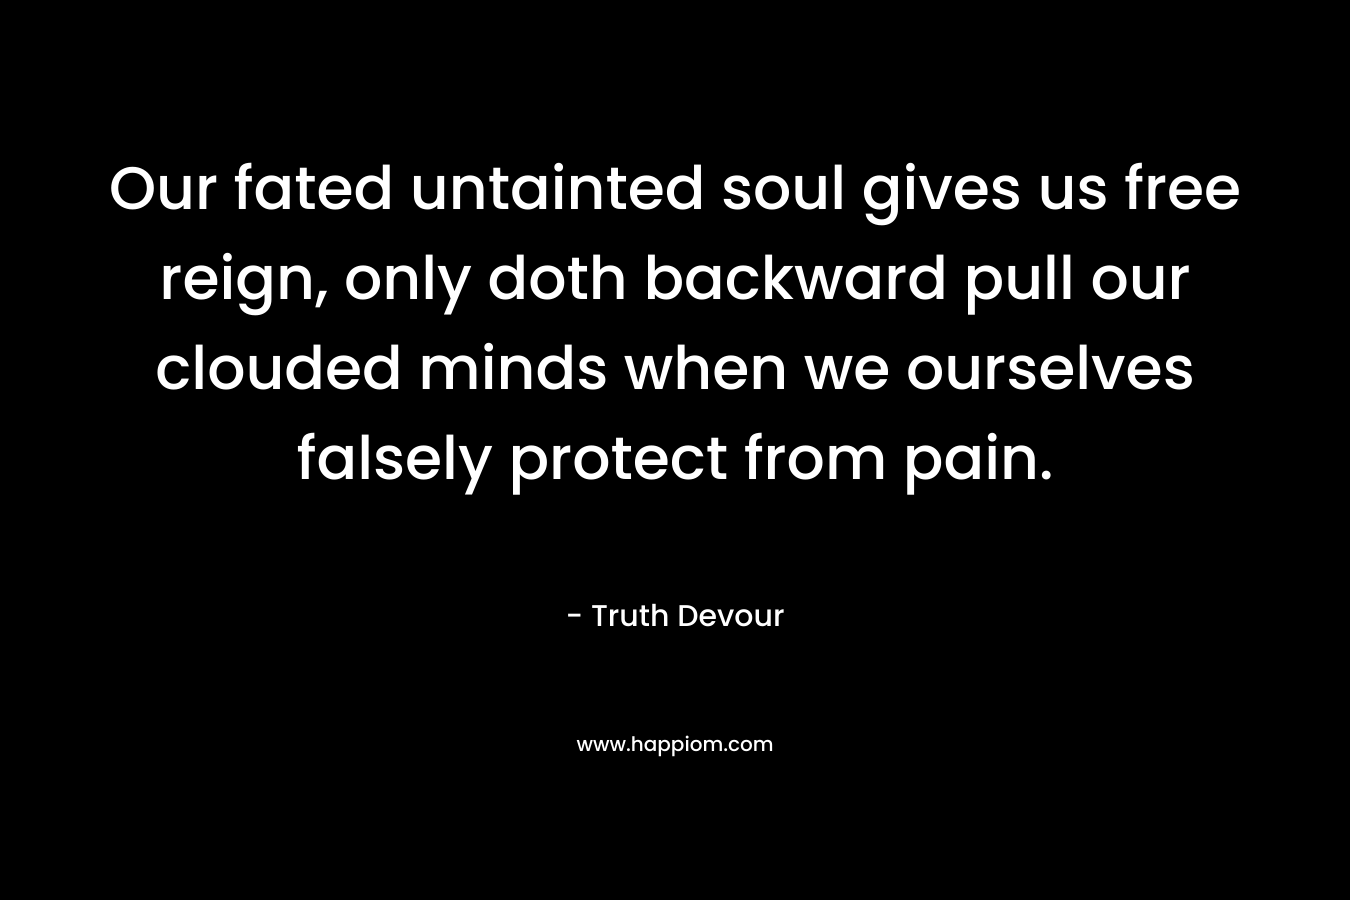 Our fated untainted soul gives us free reign, only doth backward pull our clouded minds when we ourselves falsely protect from pain.